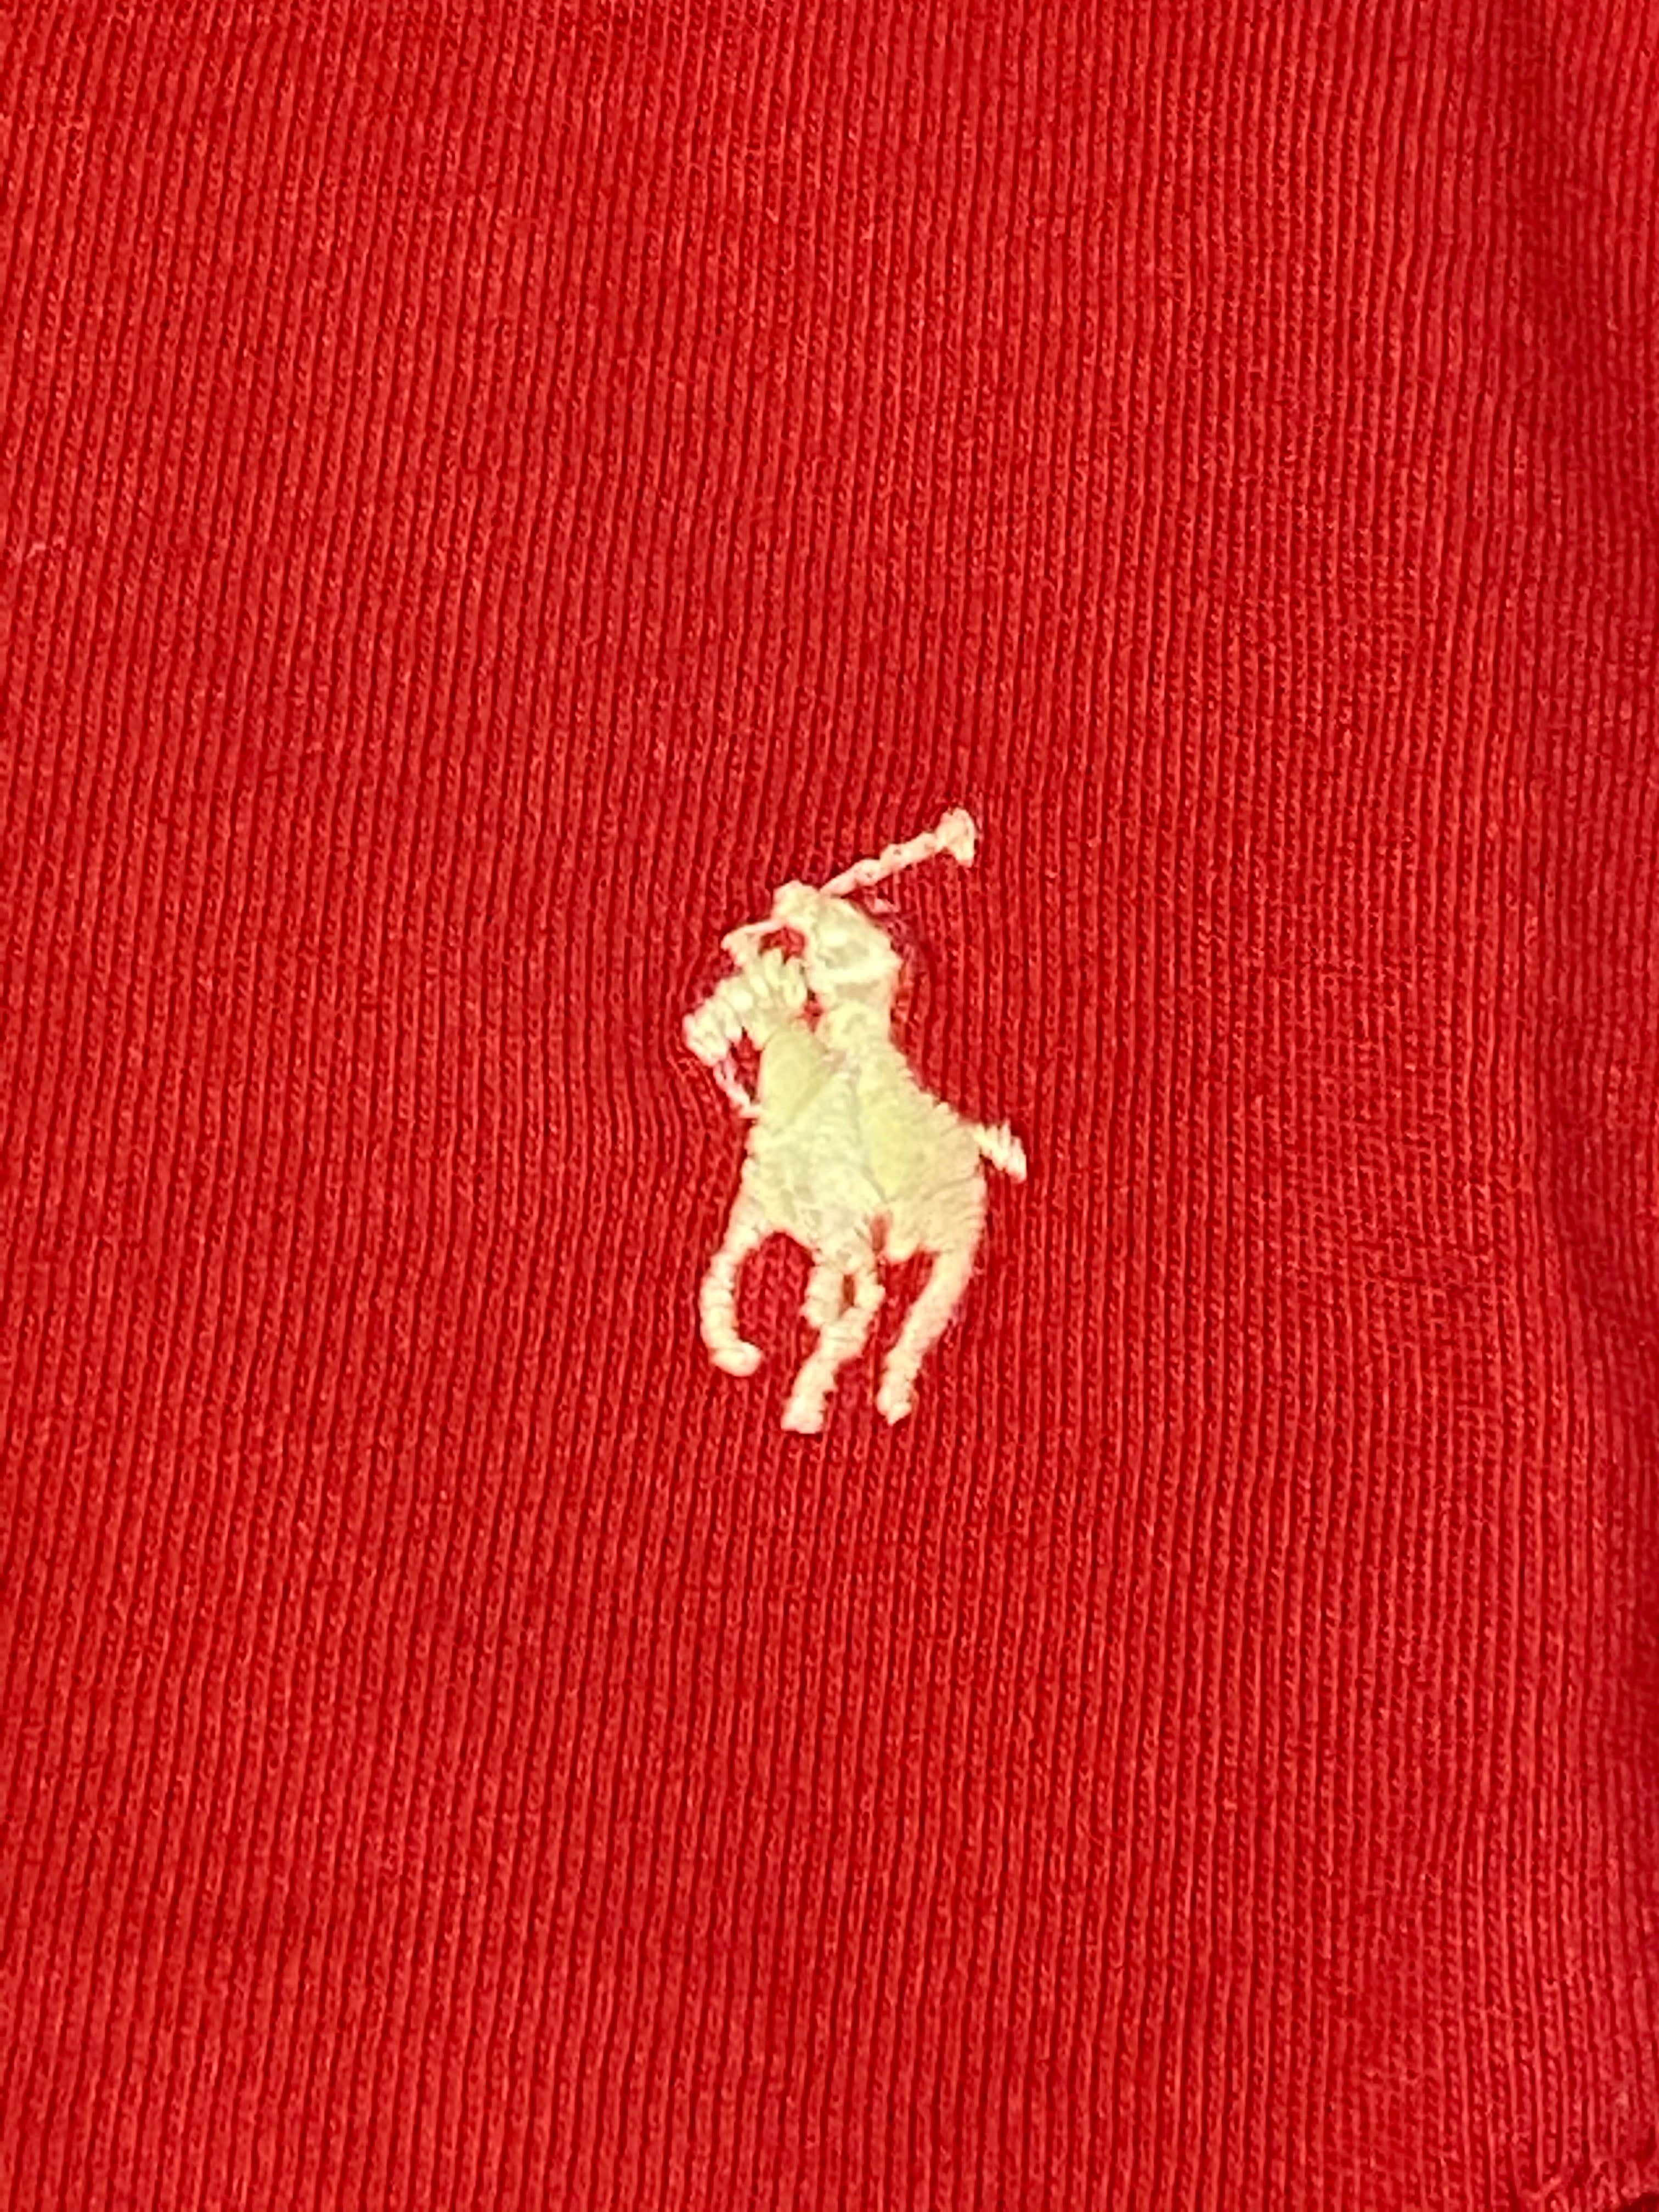 Polo Sport Pocket Tee - Faded Red